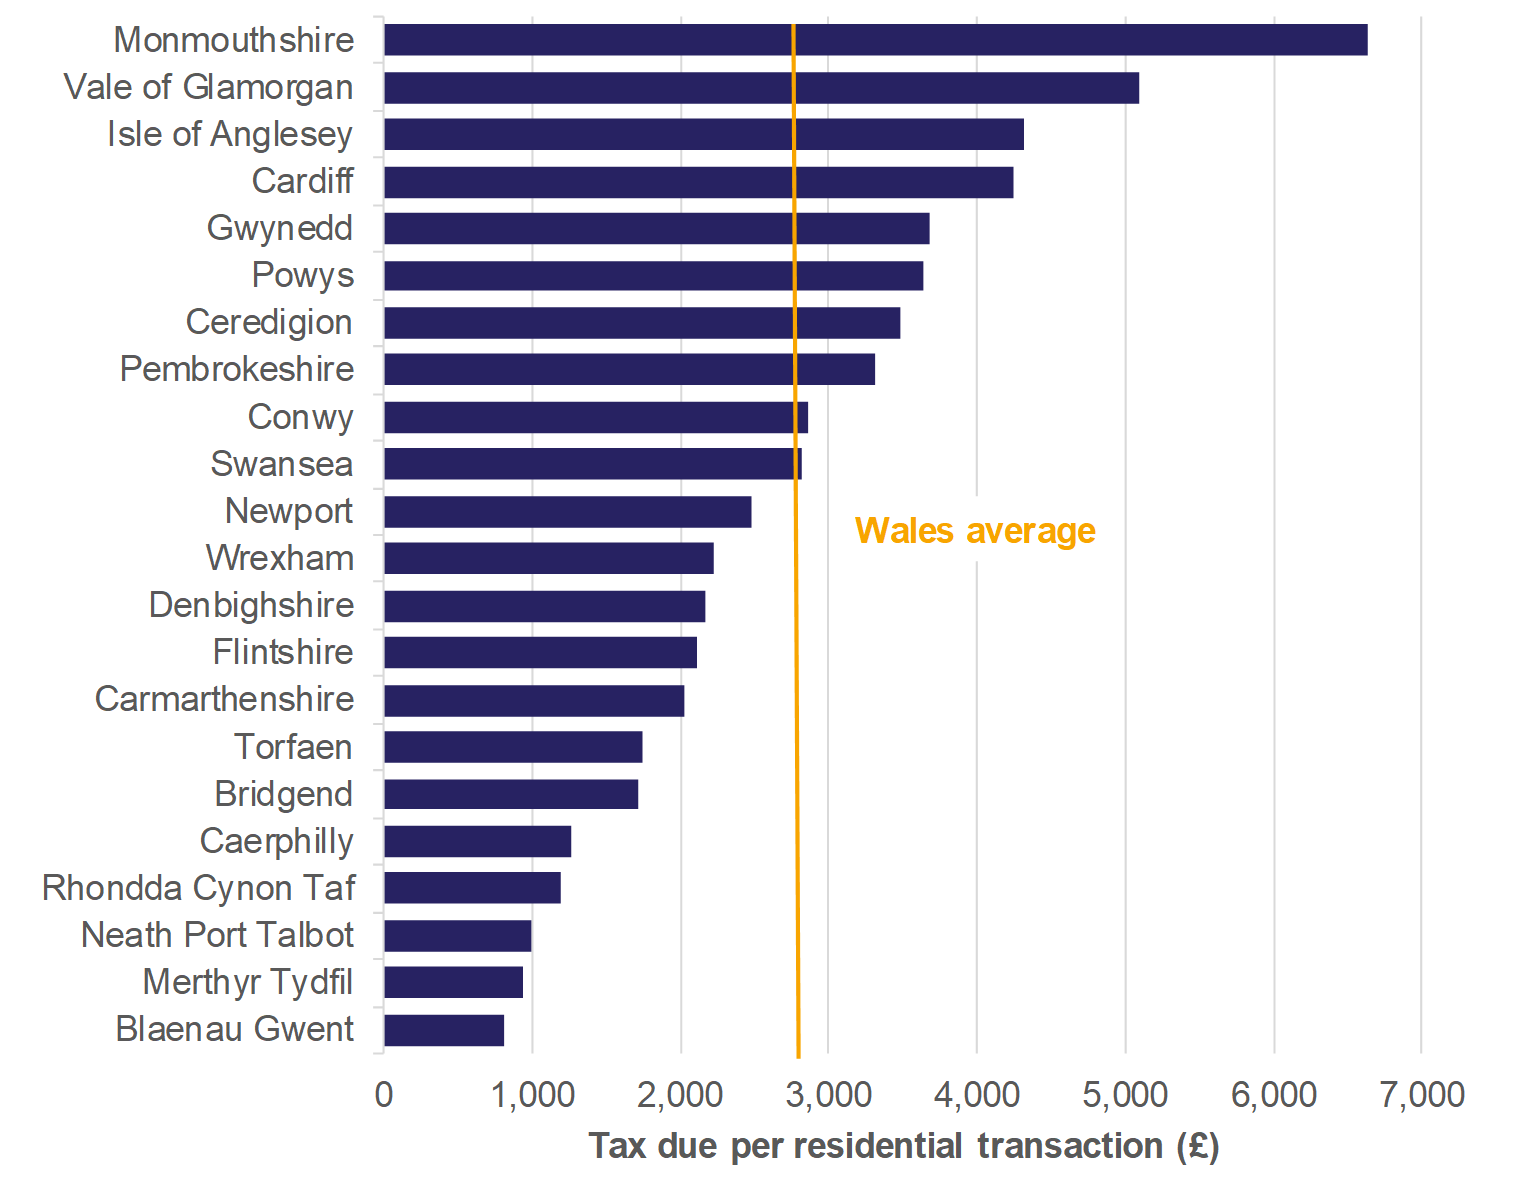 Figure 8.1 shows for residential transactions: the amount of tax due per transaction for all local authorities and a Wales average.